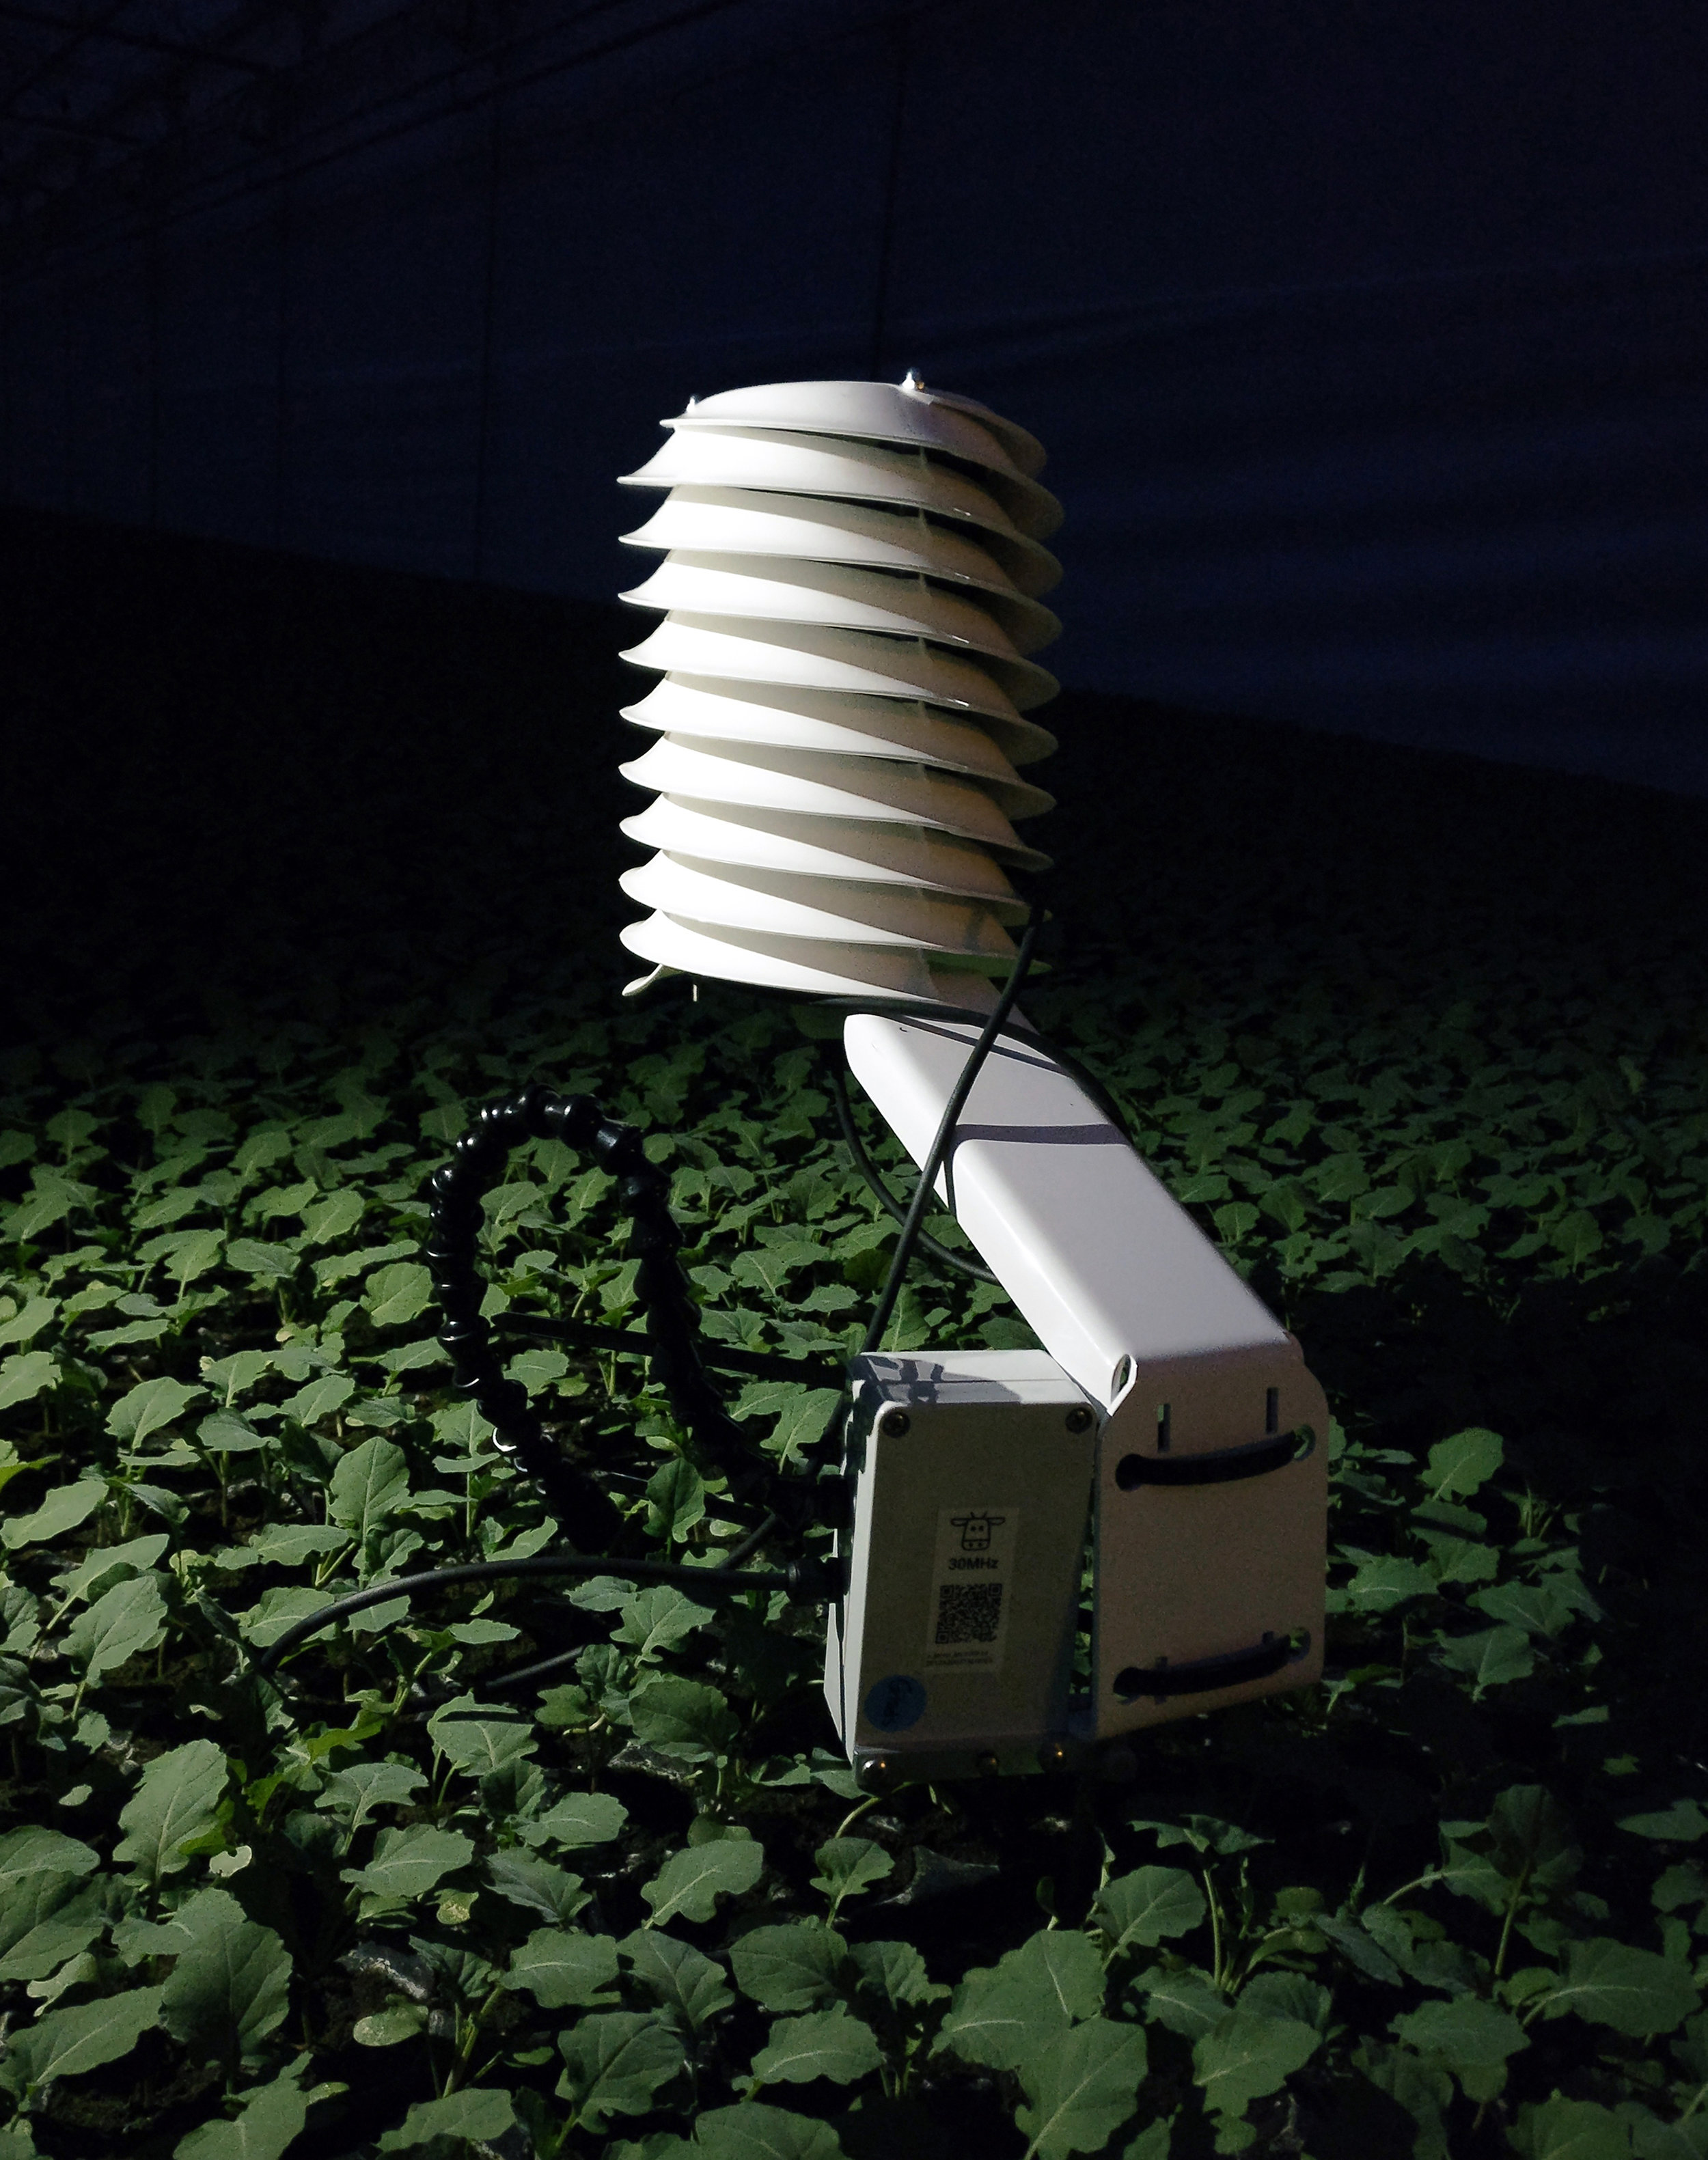 MeteoShield Professional in an agricultural application